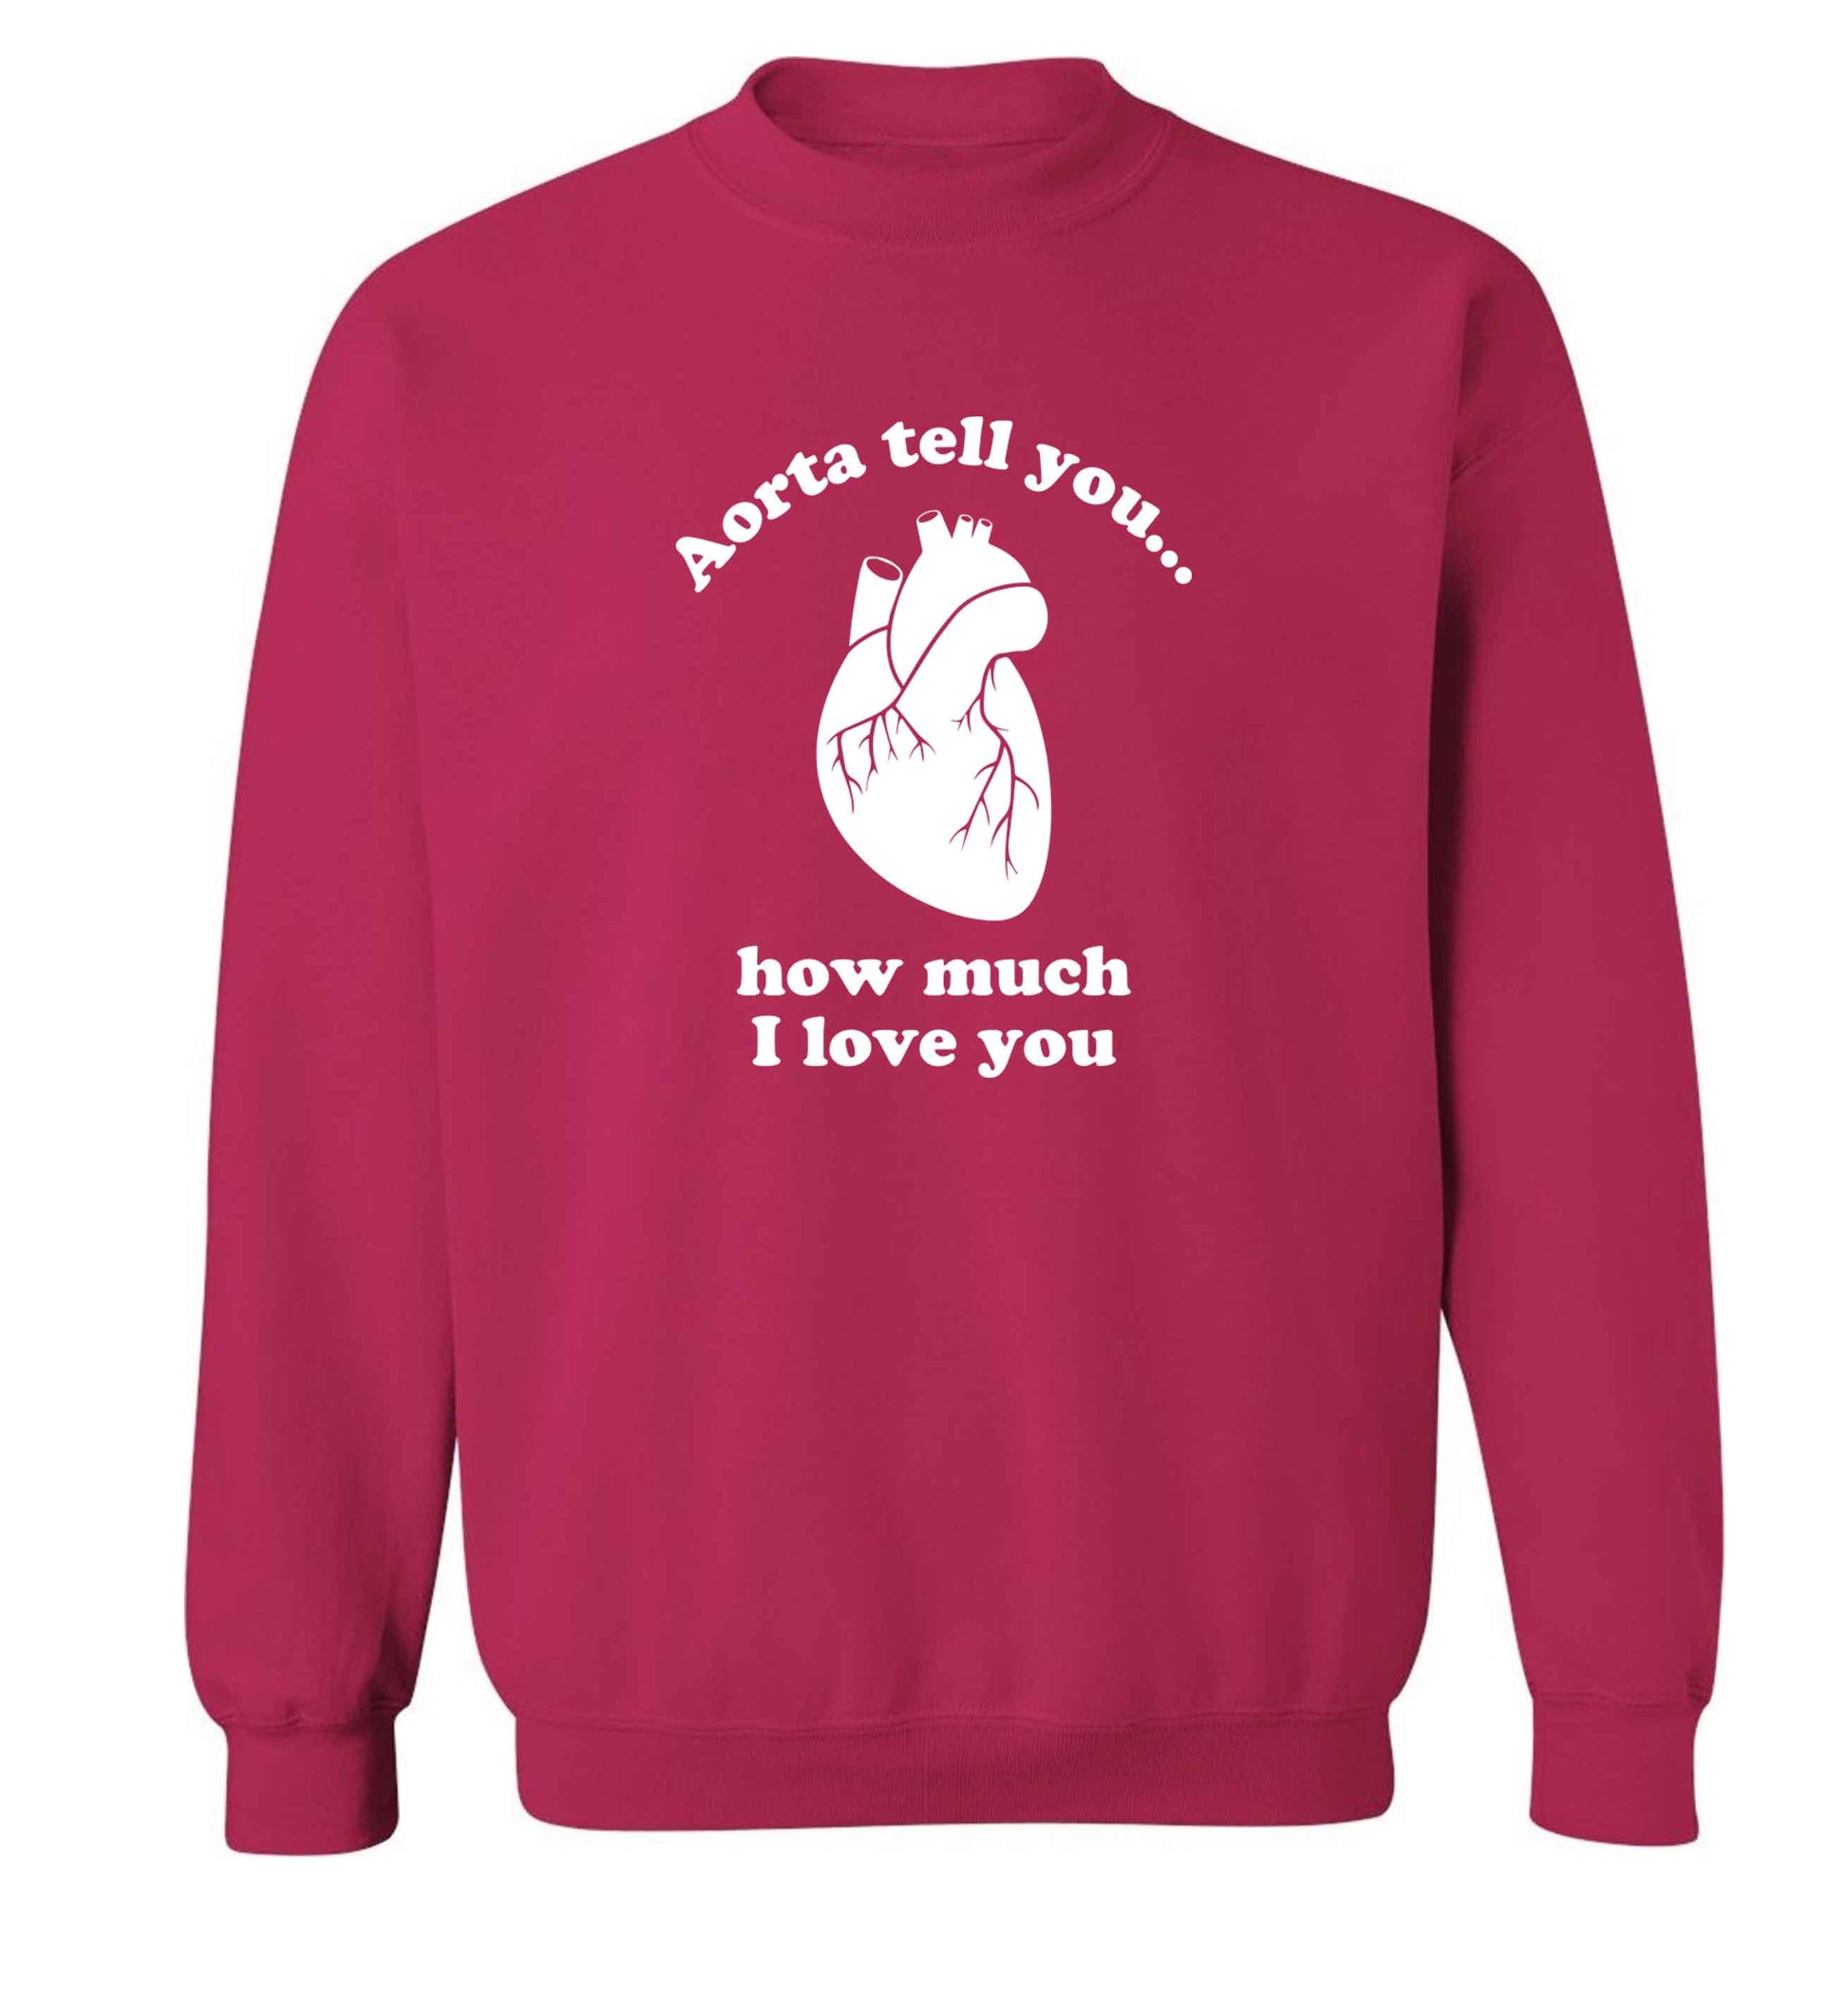 Aorta tell you how much I love you adult's unisex pink sweater 2XL